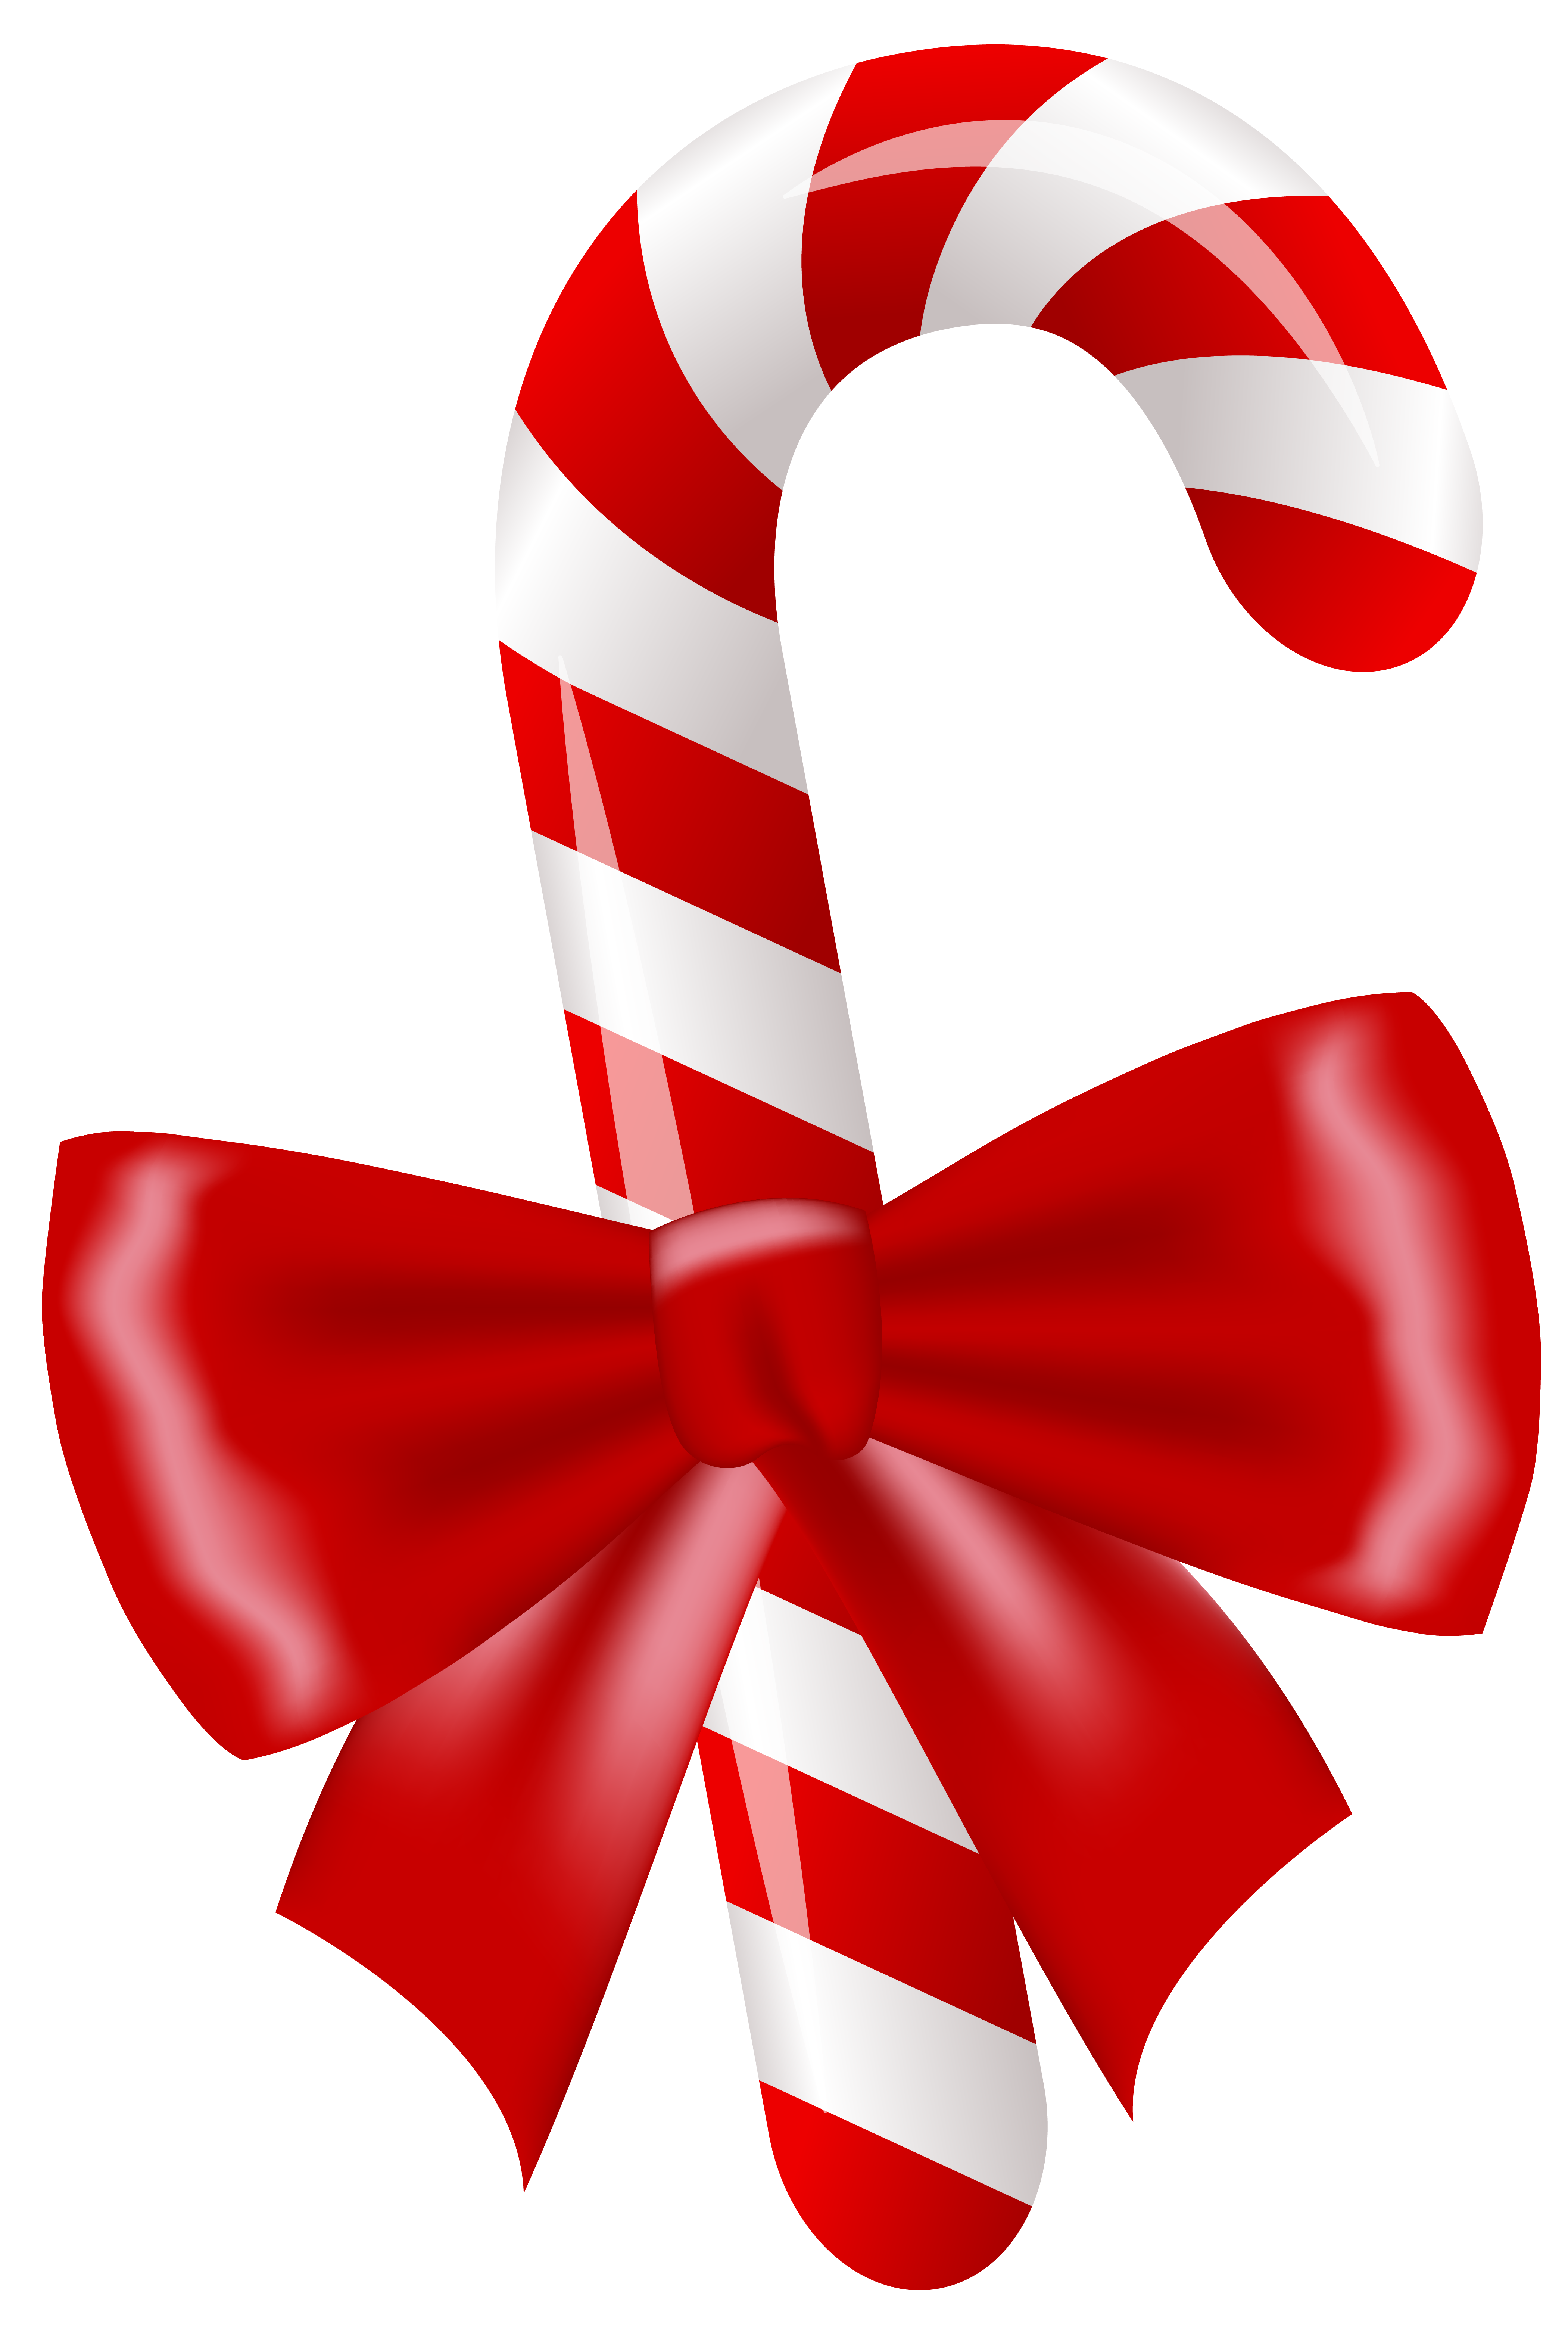 Christmas Candy PNG HD Quality